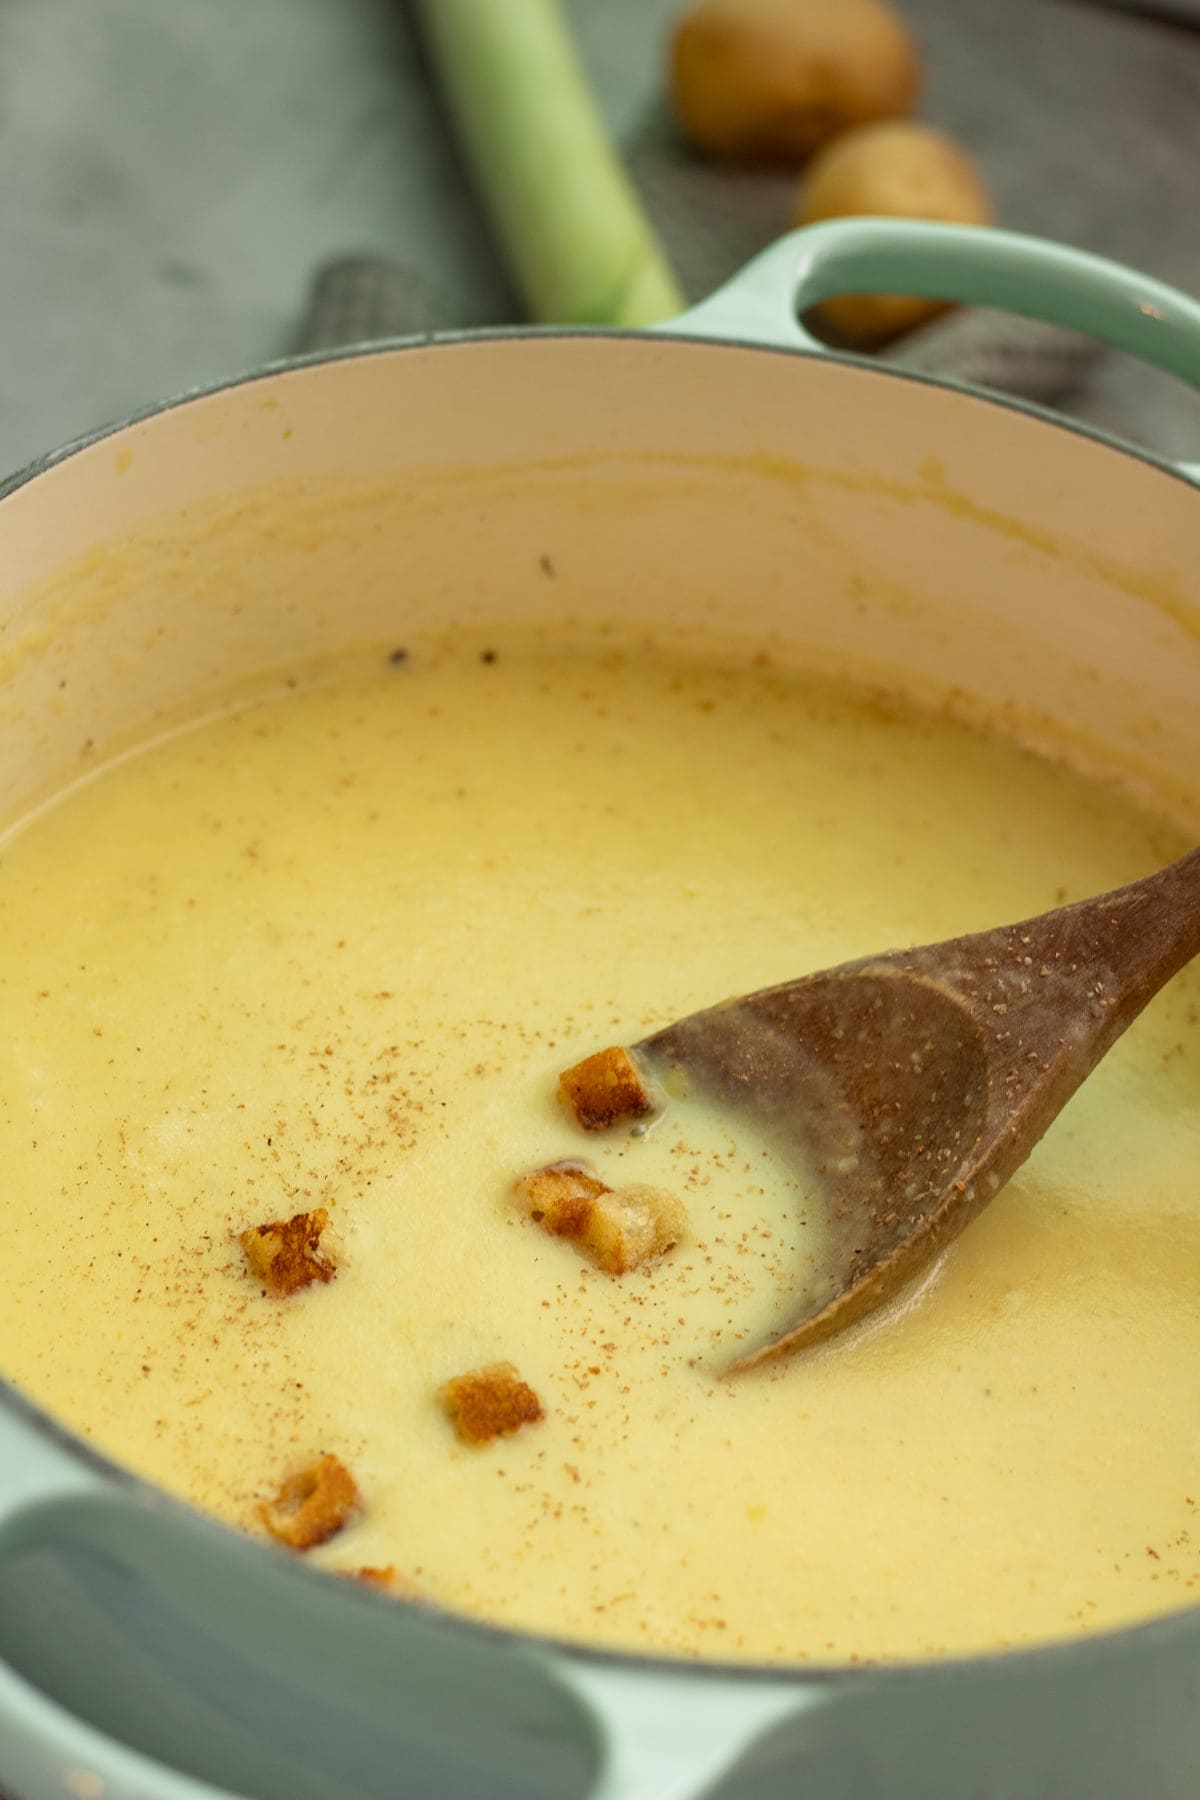 Pot of leek and potato soup garnished with croutons and nutmeg